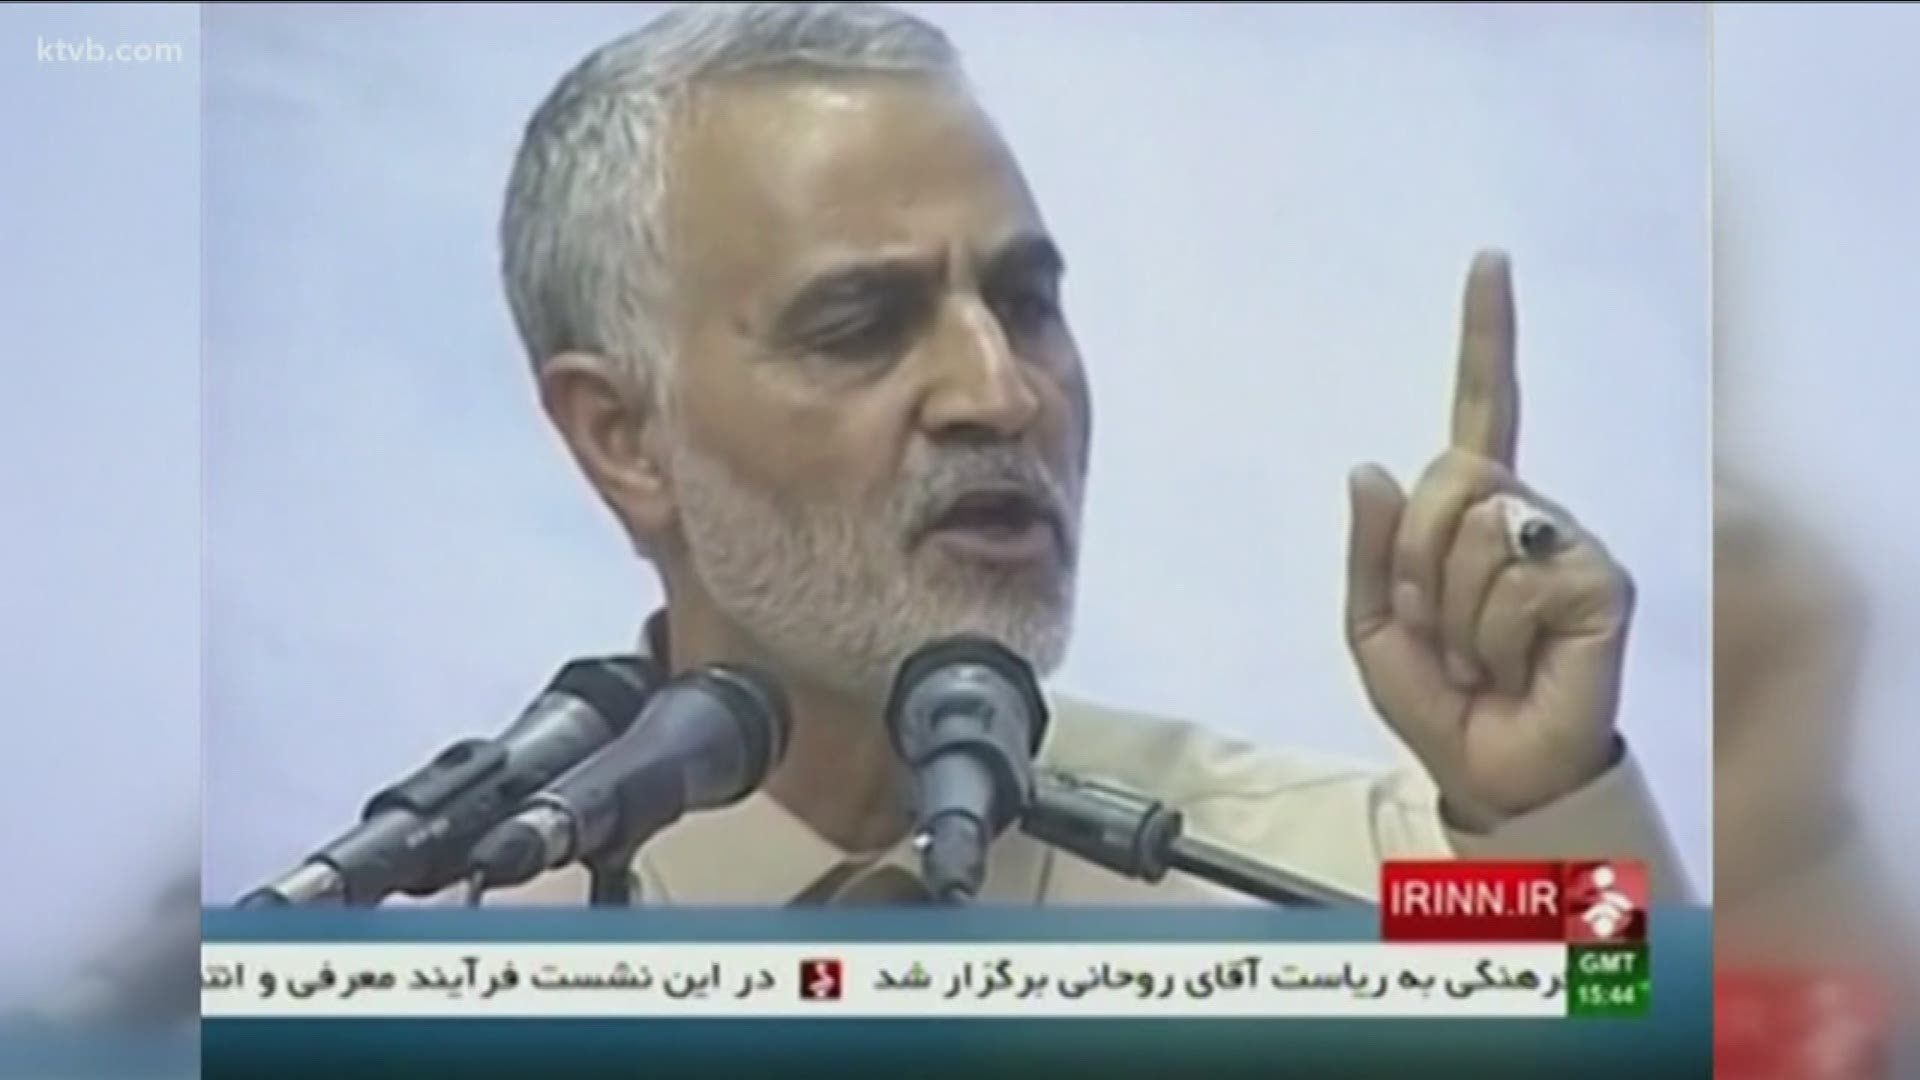 Iran's foreign minister called the move a 'foolish escalation' after Gen. Soleimani, head of Iran's elite Quds force, was killed in a strike Baghdad's airport.